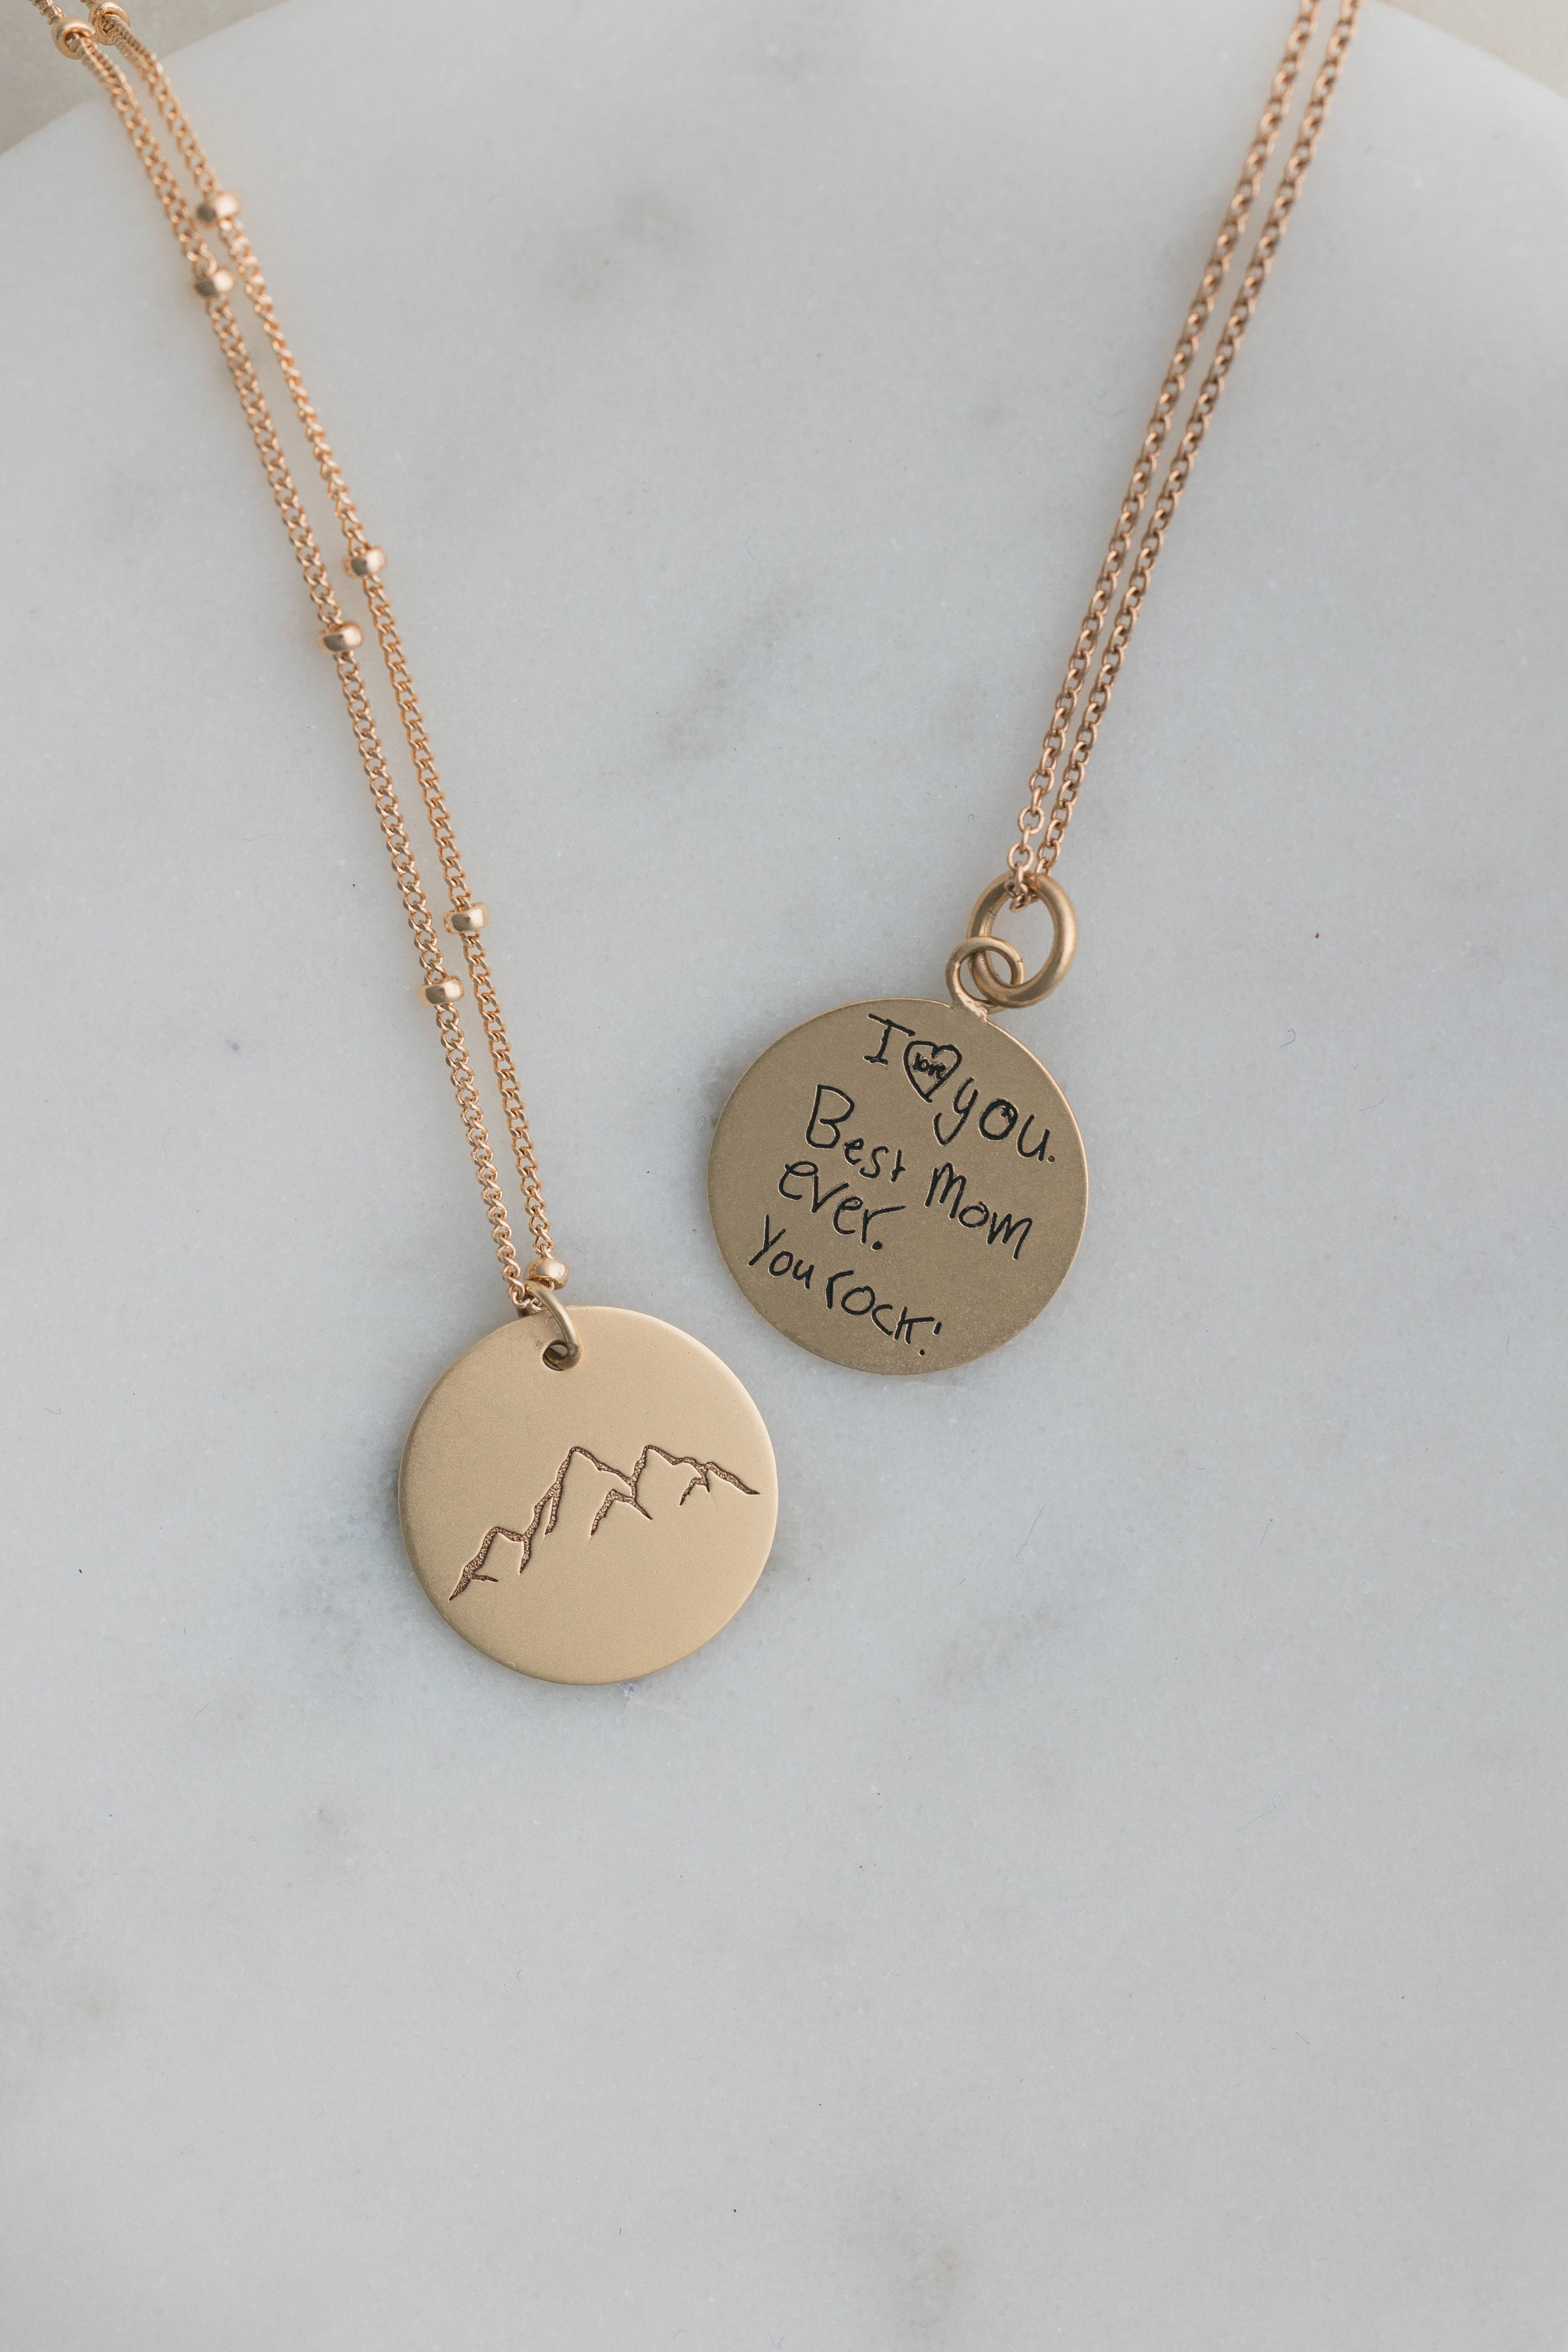 Personalized Necklace with Round Photo Pendant and Engraving Options –  Liliana and Liam